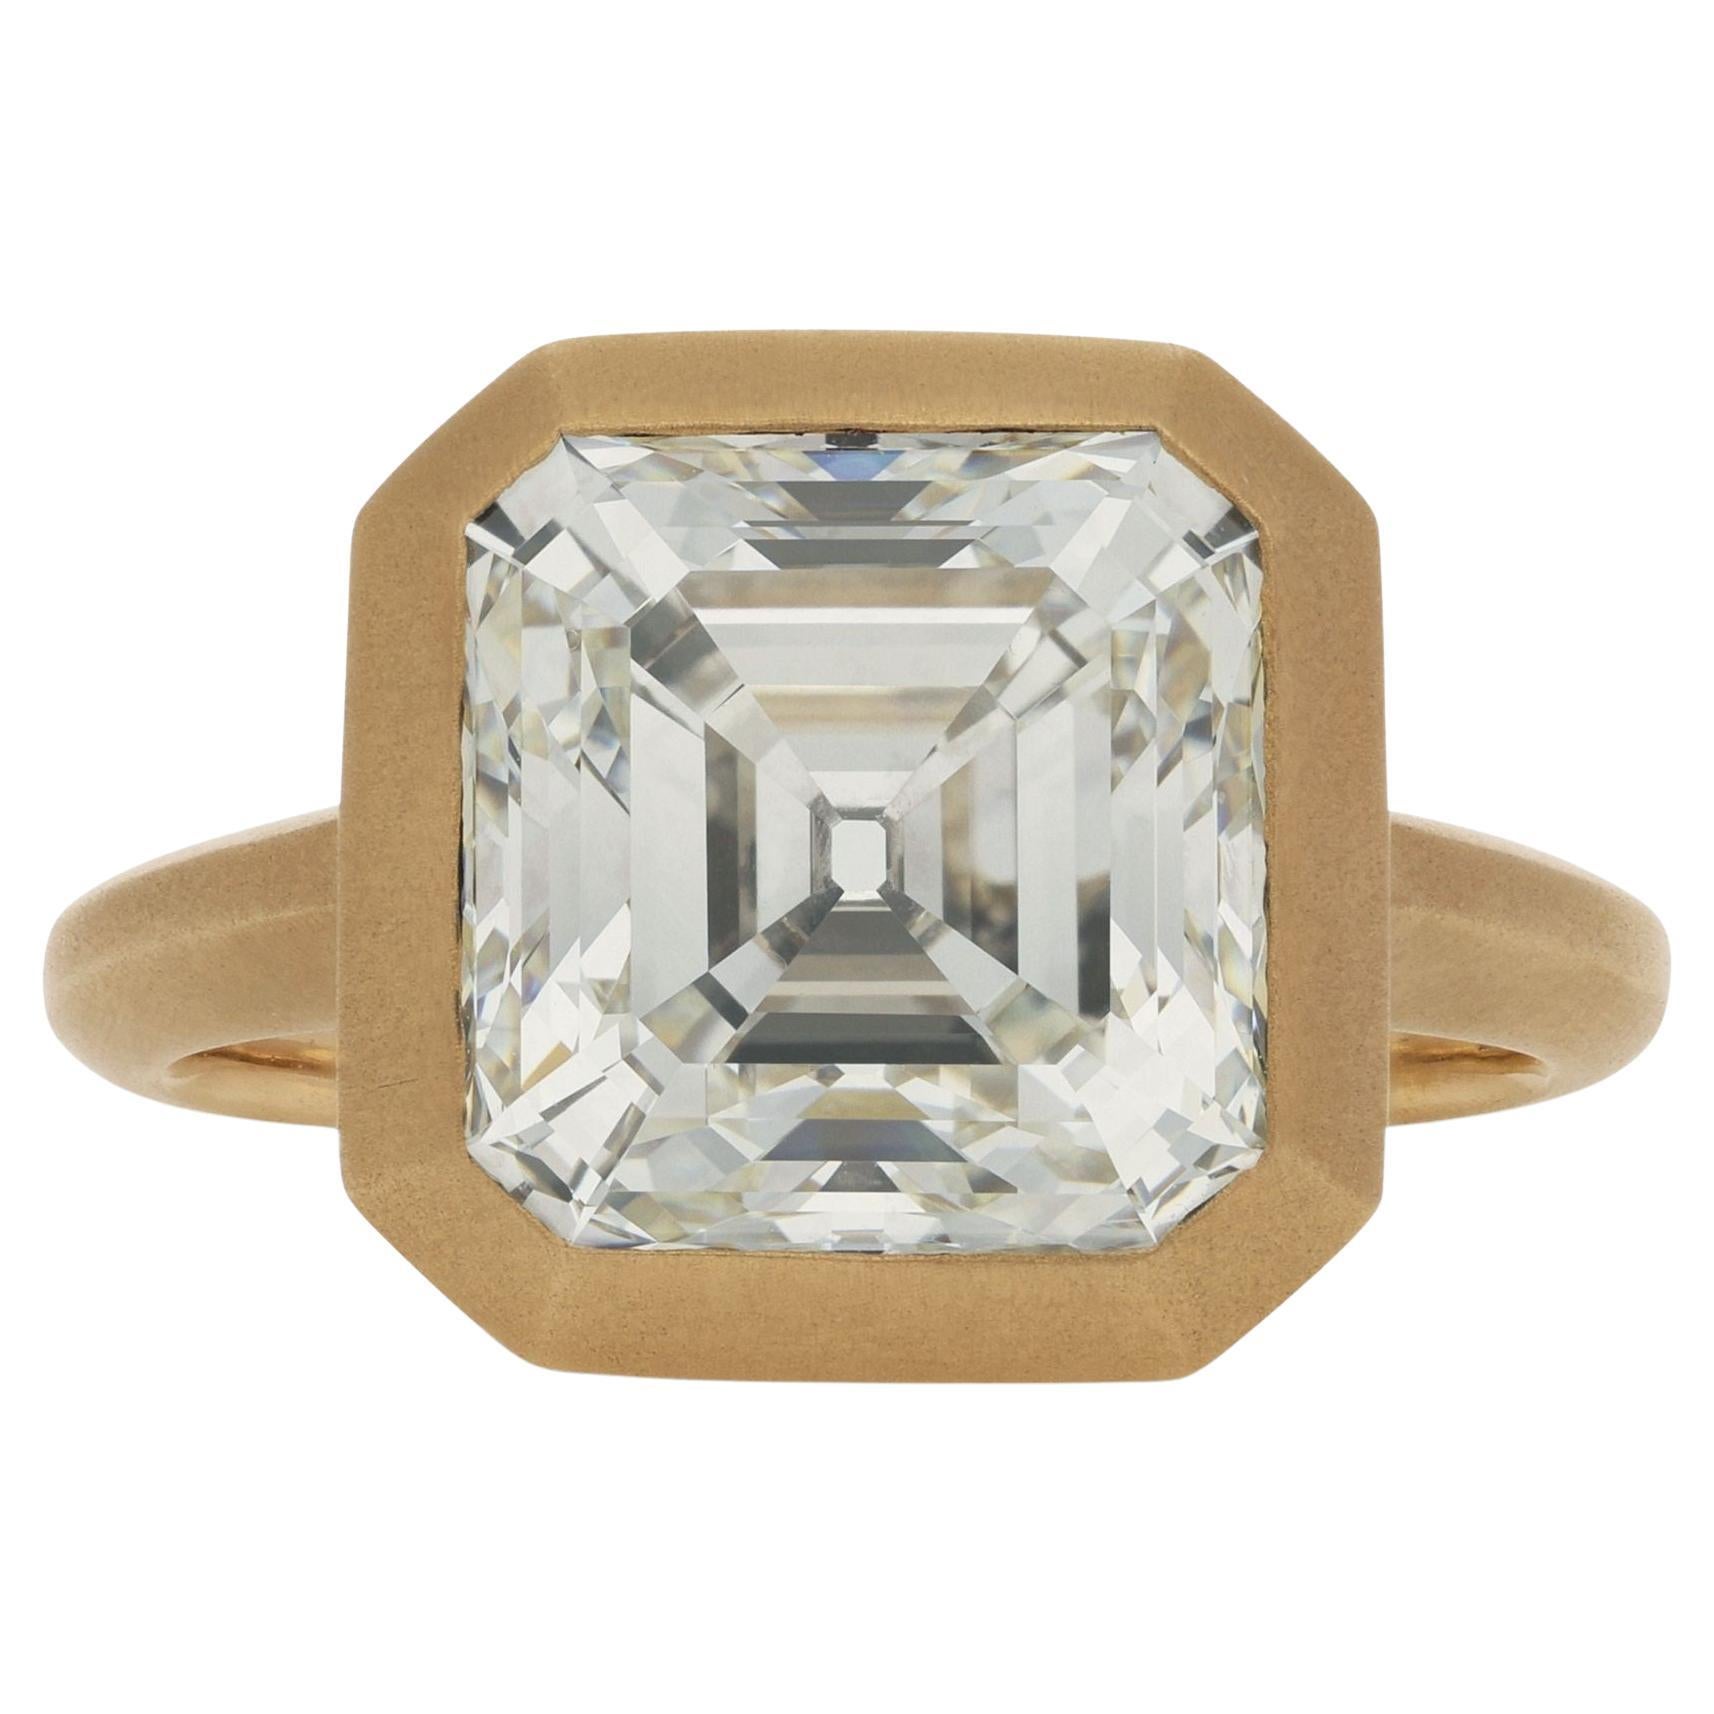 Hancock’s 5.06ct Antique Asscher Cut Diamond in Brushed Rose Gold Solitaire Ring For Sale